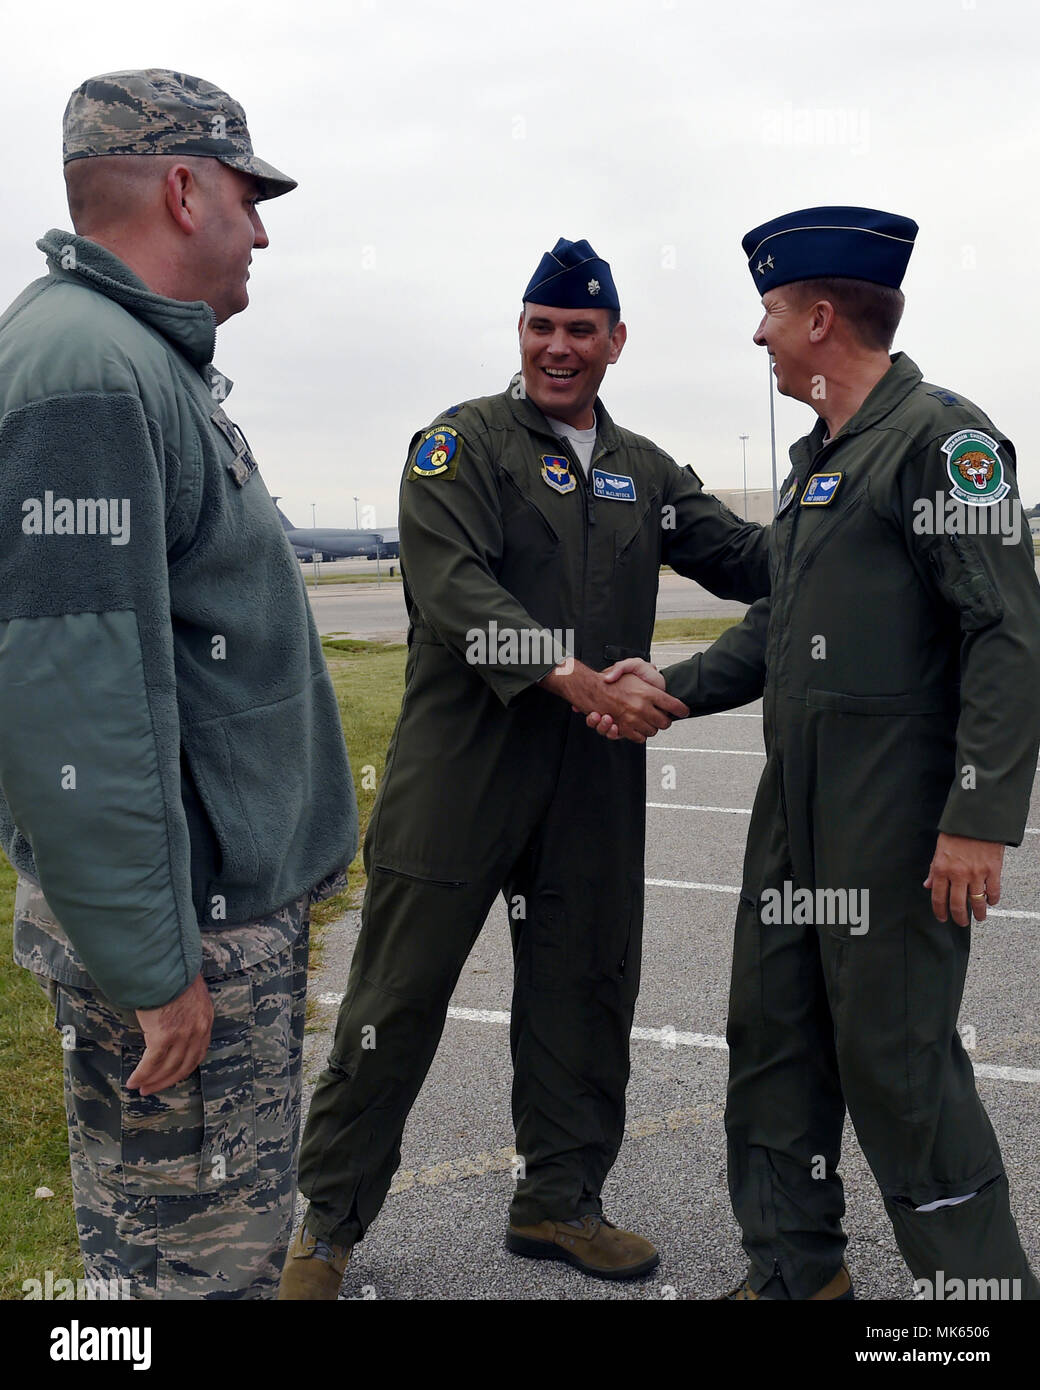 Lt. Col. Patrick McClintock (center), 502nd Operations Support Squadron commander, greets Maj. Gen. Patrick Doherty, 19th Air Force commander, during his stop at Lackland’s air traffic control tower, Kelly Field Annex, Nov. 8, 2017. The general took time to visit various work environments to interact with members of the JBSA community and listen to their feedback. (Air National Guard photo by Tech. Sgt. Mindy Bloem)  Stock Photo